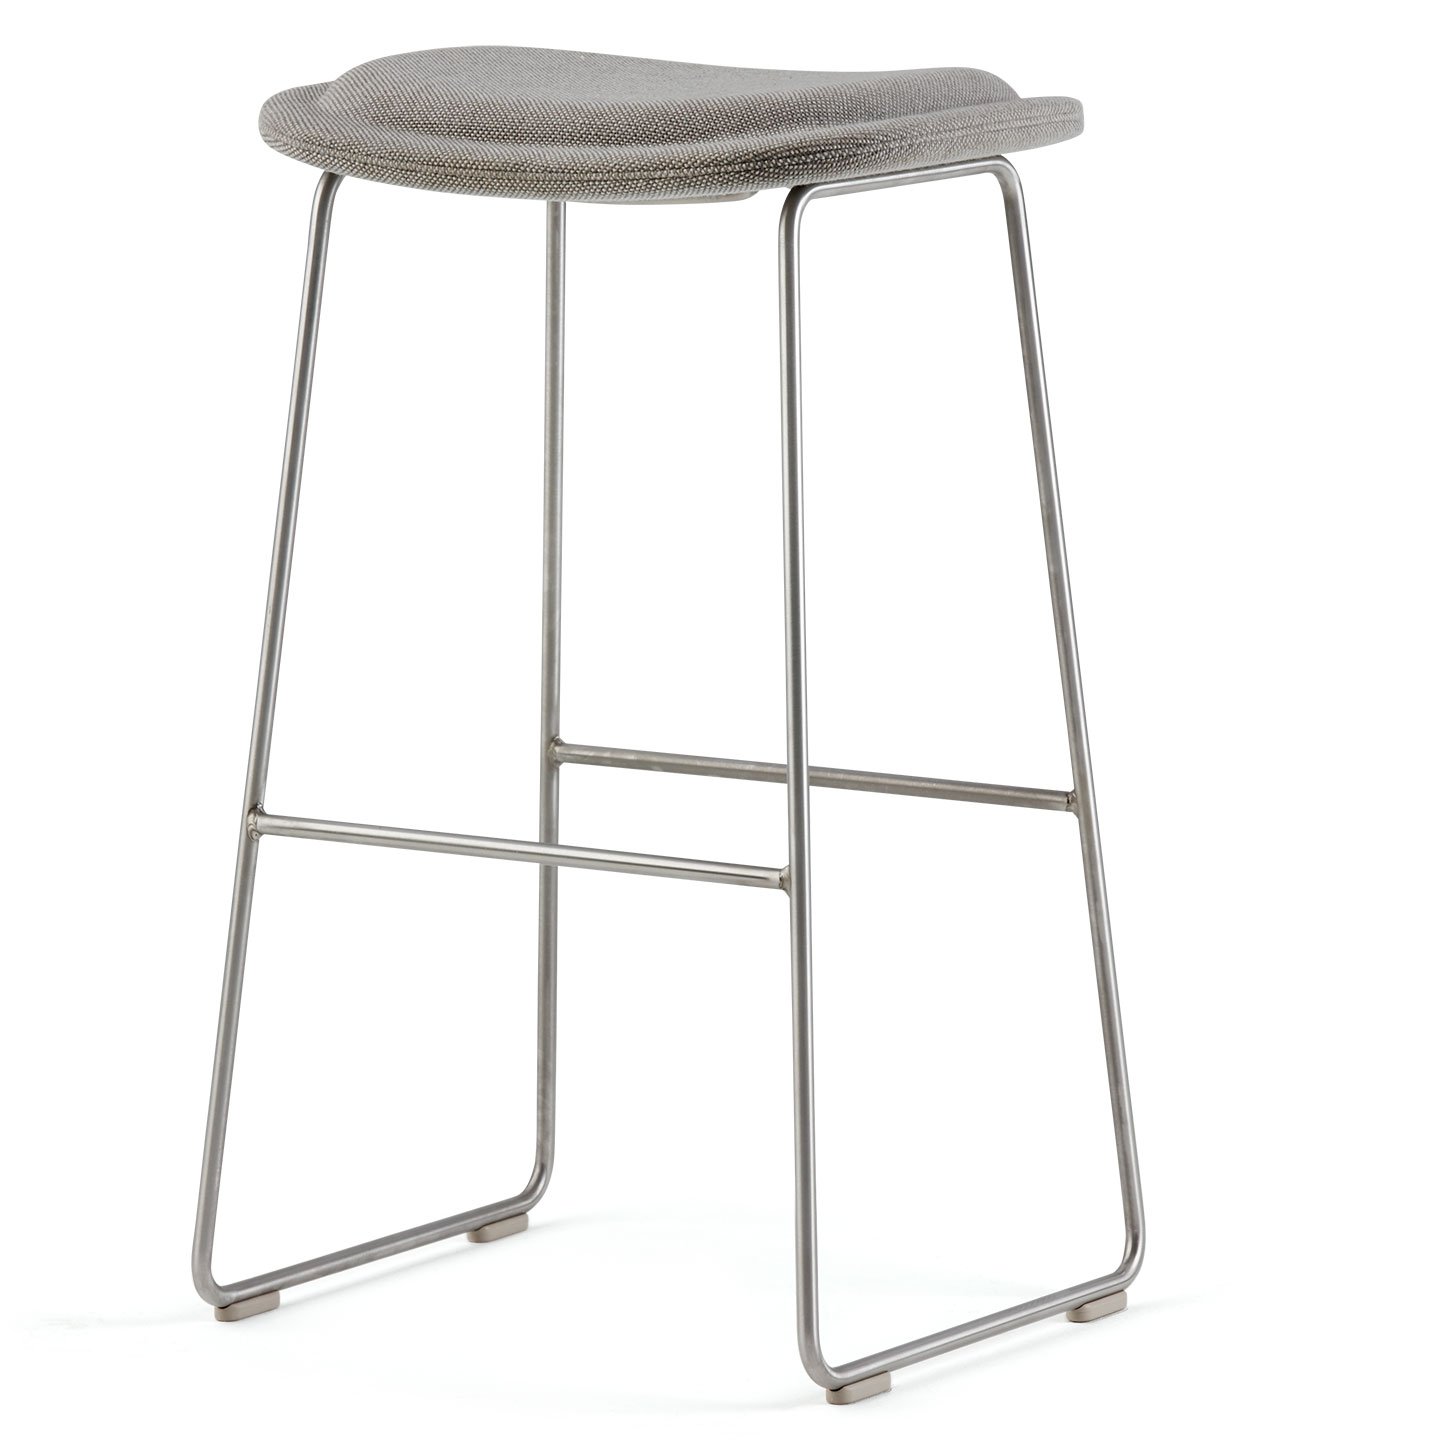 Haworth Hi-Pad stool with metal legs and grey seat in a side view